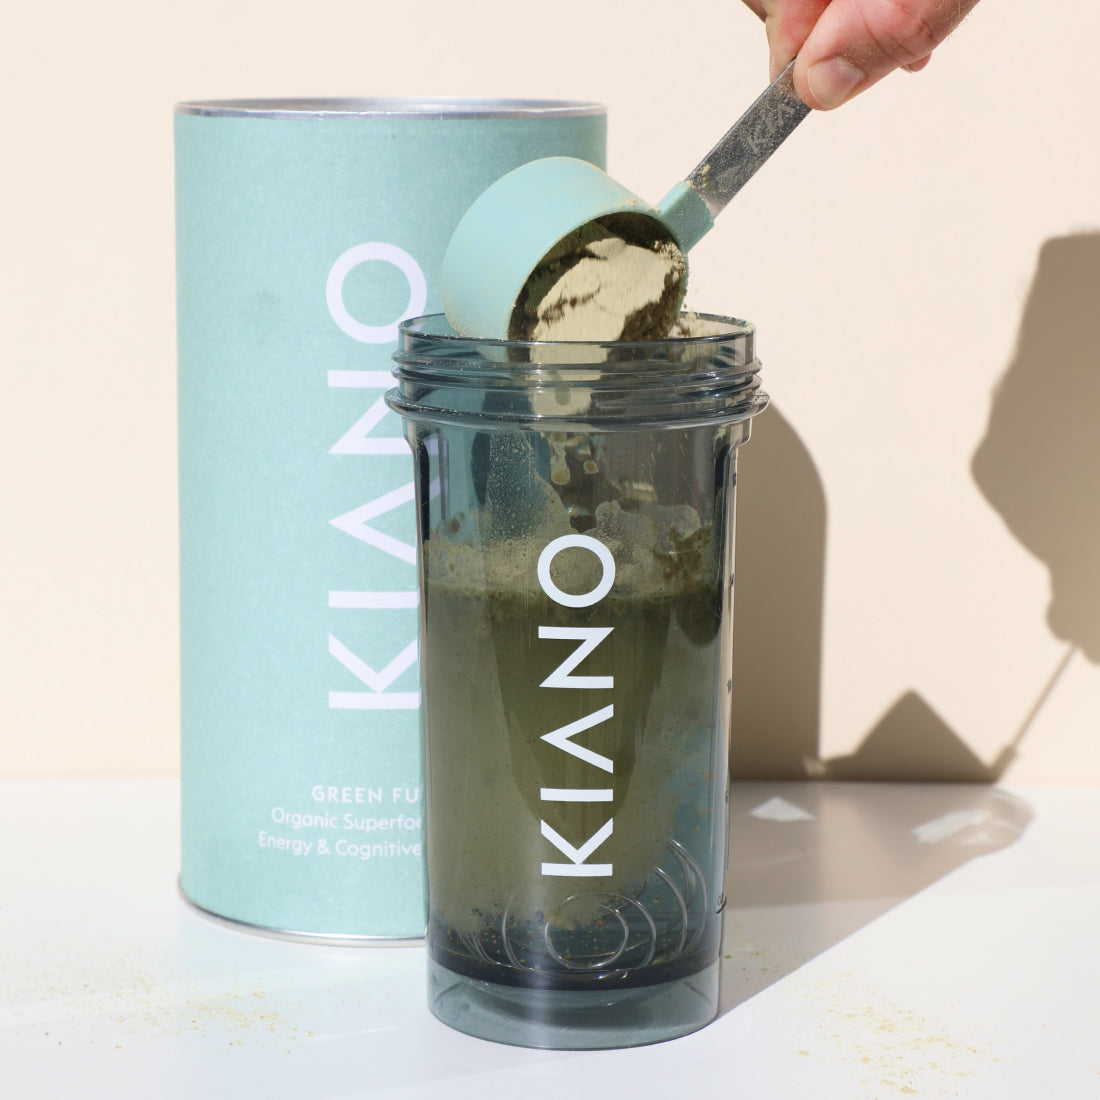 KIANO's Meal Shake with Detox Greens: A Convenient Solution for Wellness